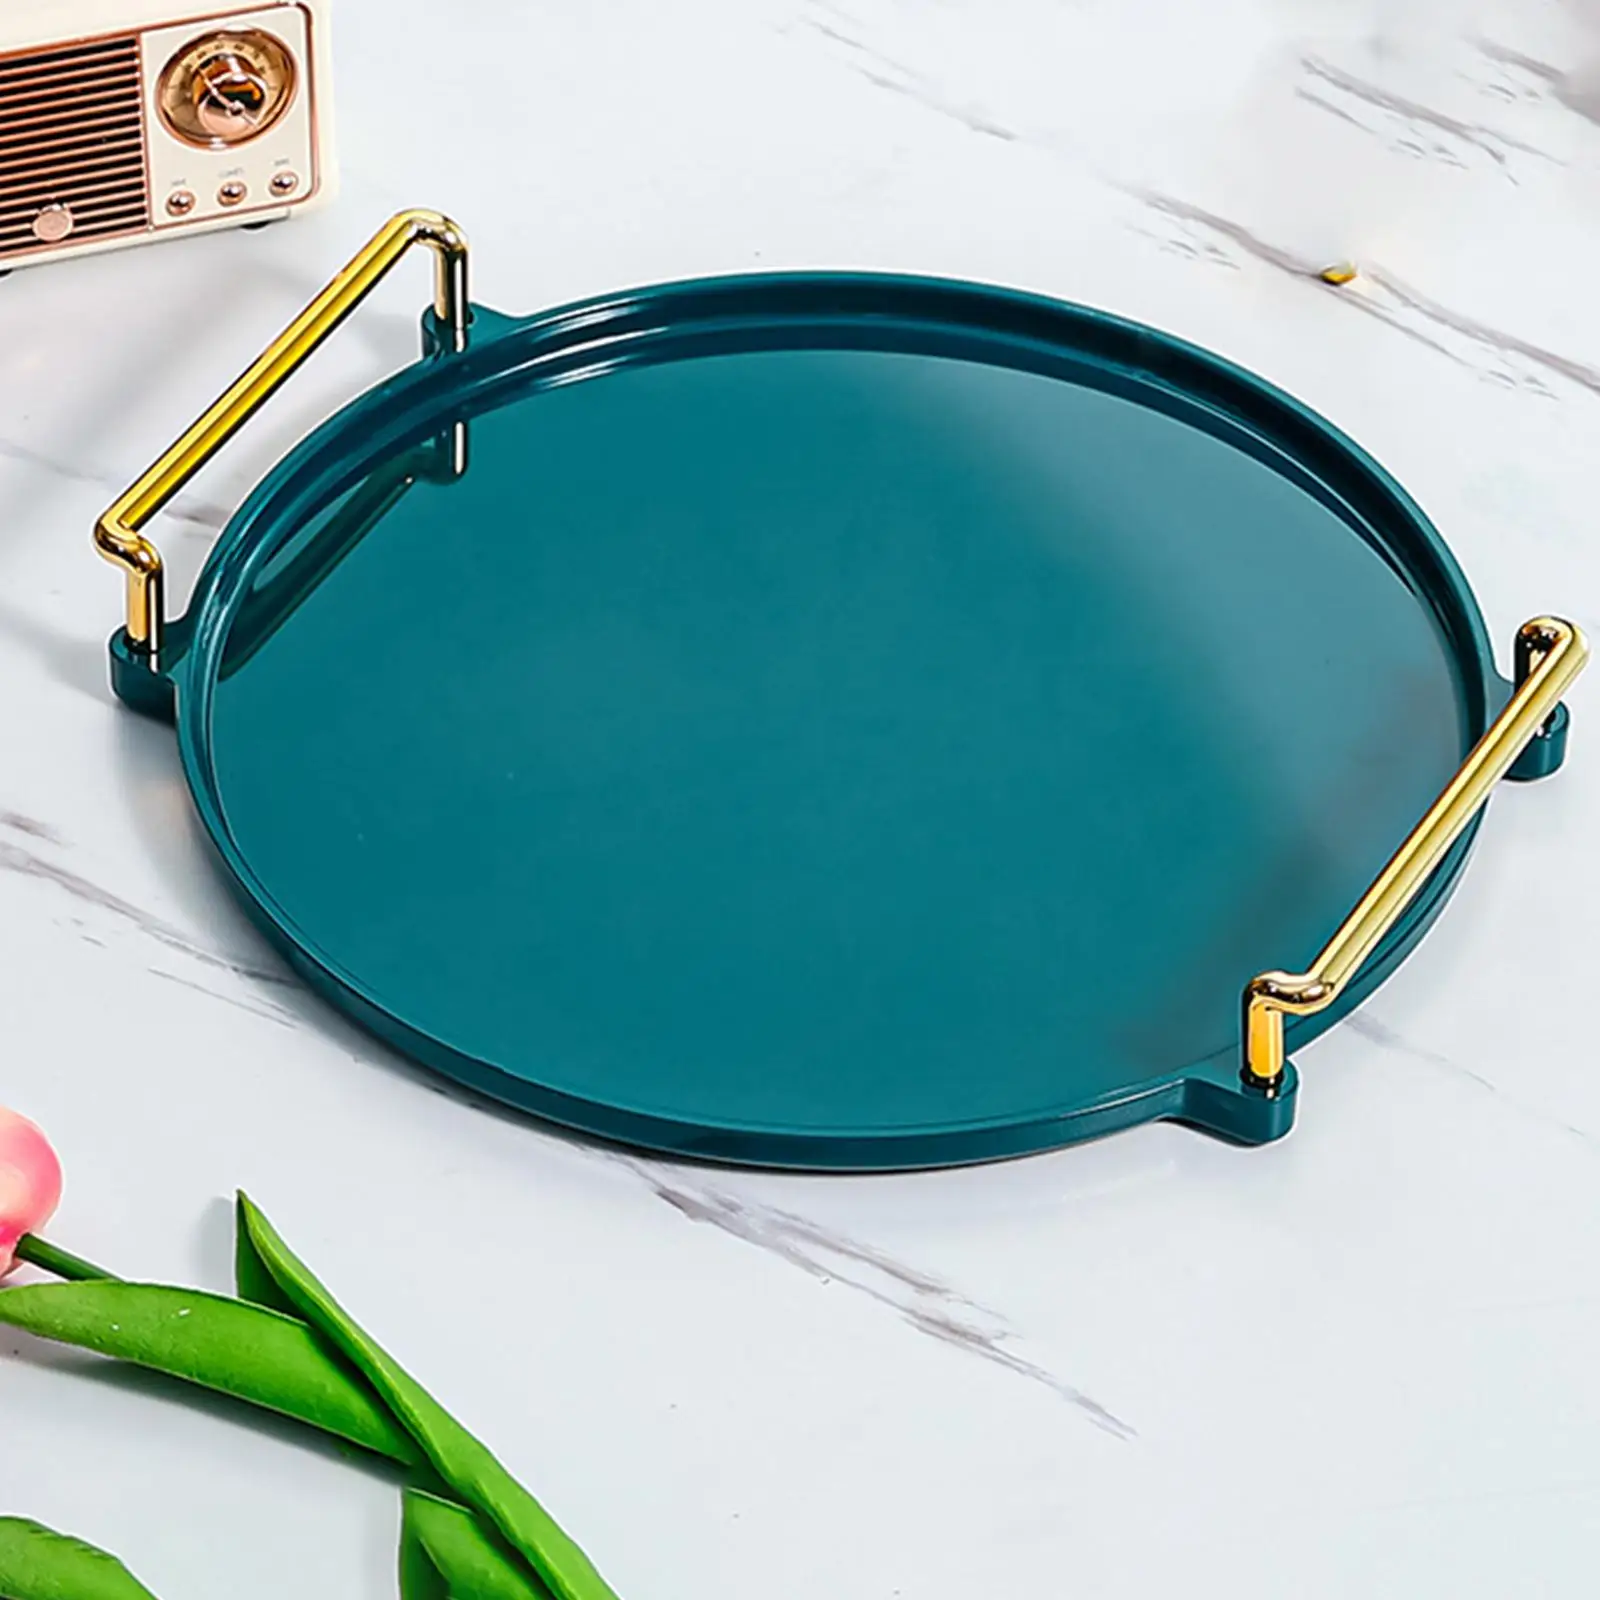 Decorative Serving Tray Display with Handles Reusable Round Sturdy Plate Platter for Food Dinner Indoor Outdoor Bathroom Dessert